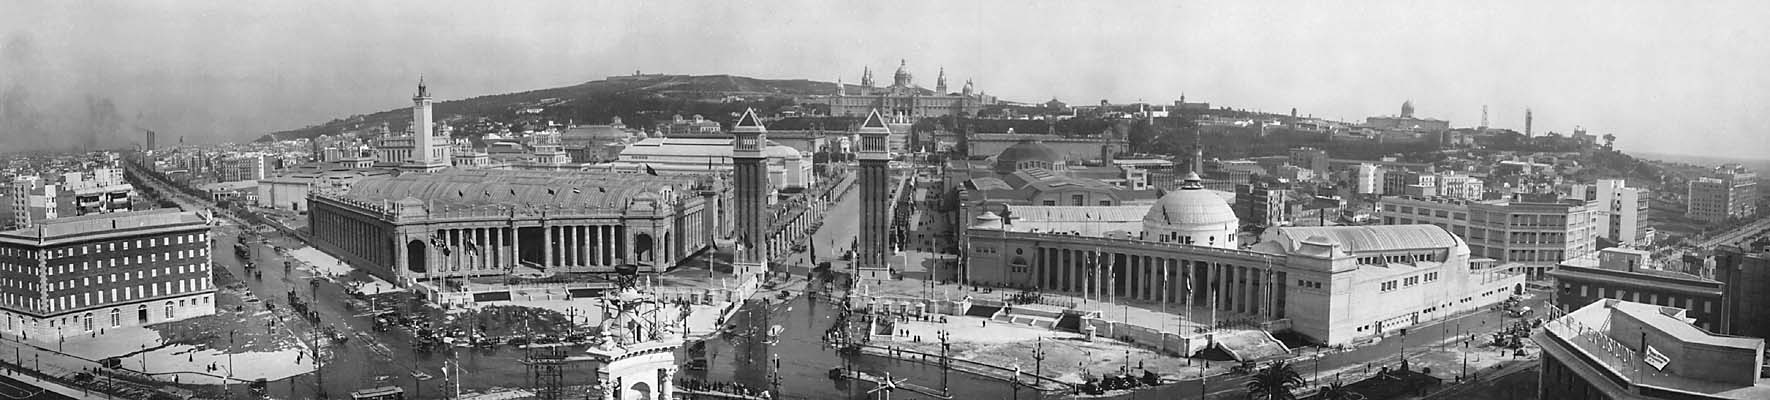 Panoramic view of the Barcelona Exposition, Spain. 1929